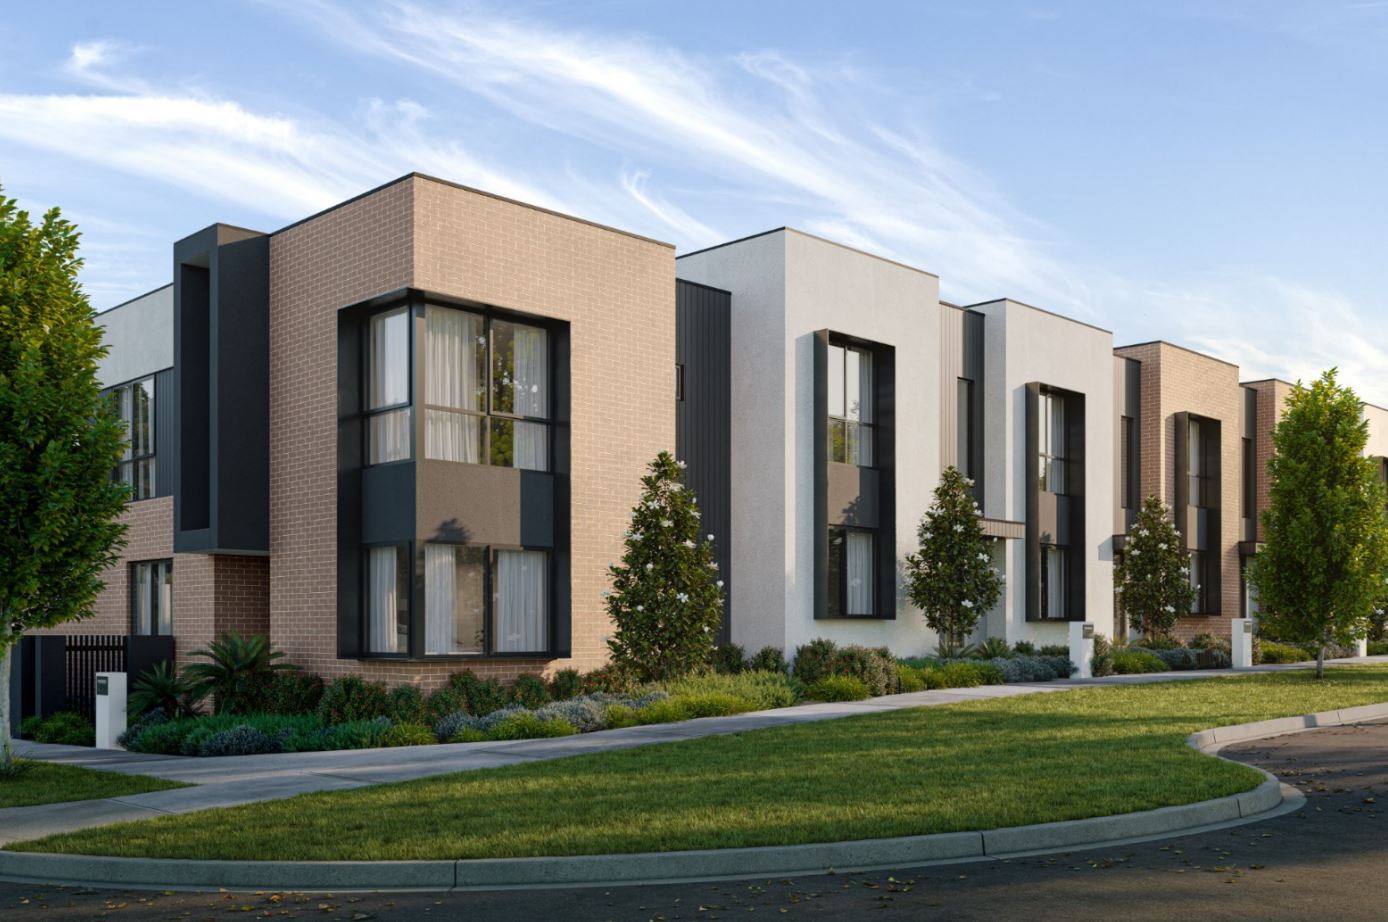 Turnkey townhouses selling in the heart of Woodlea